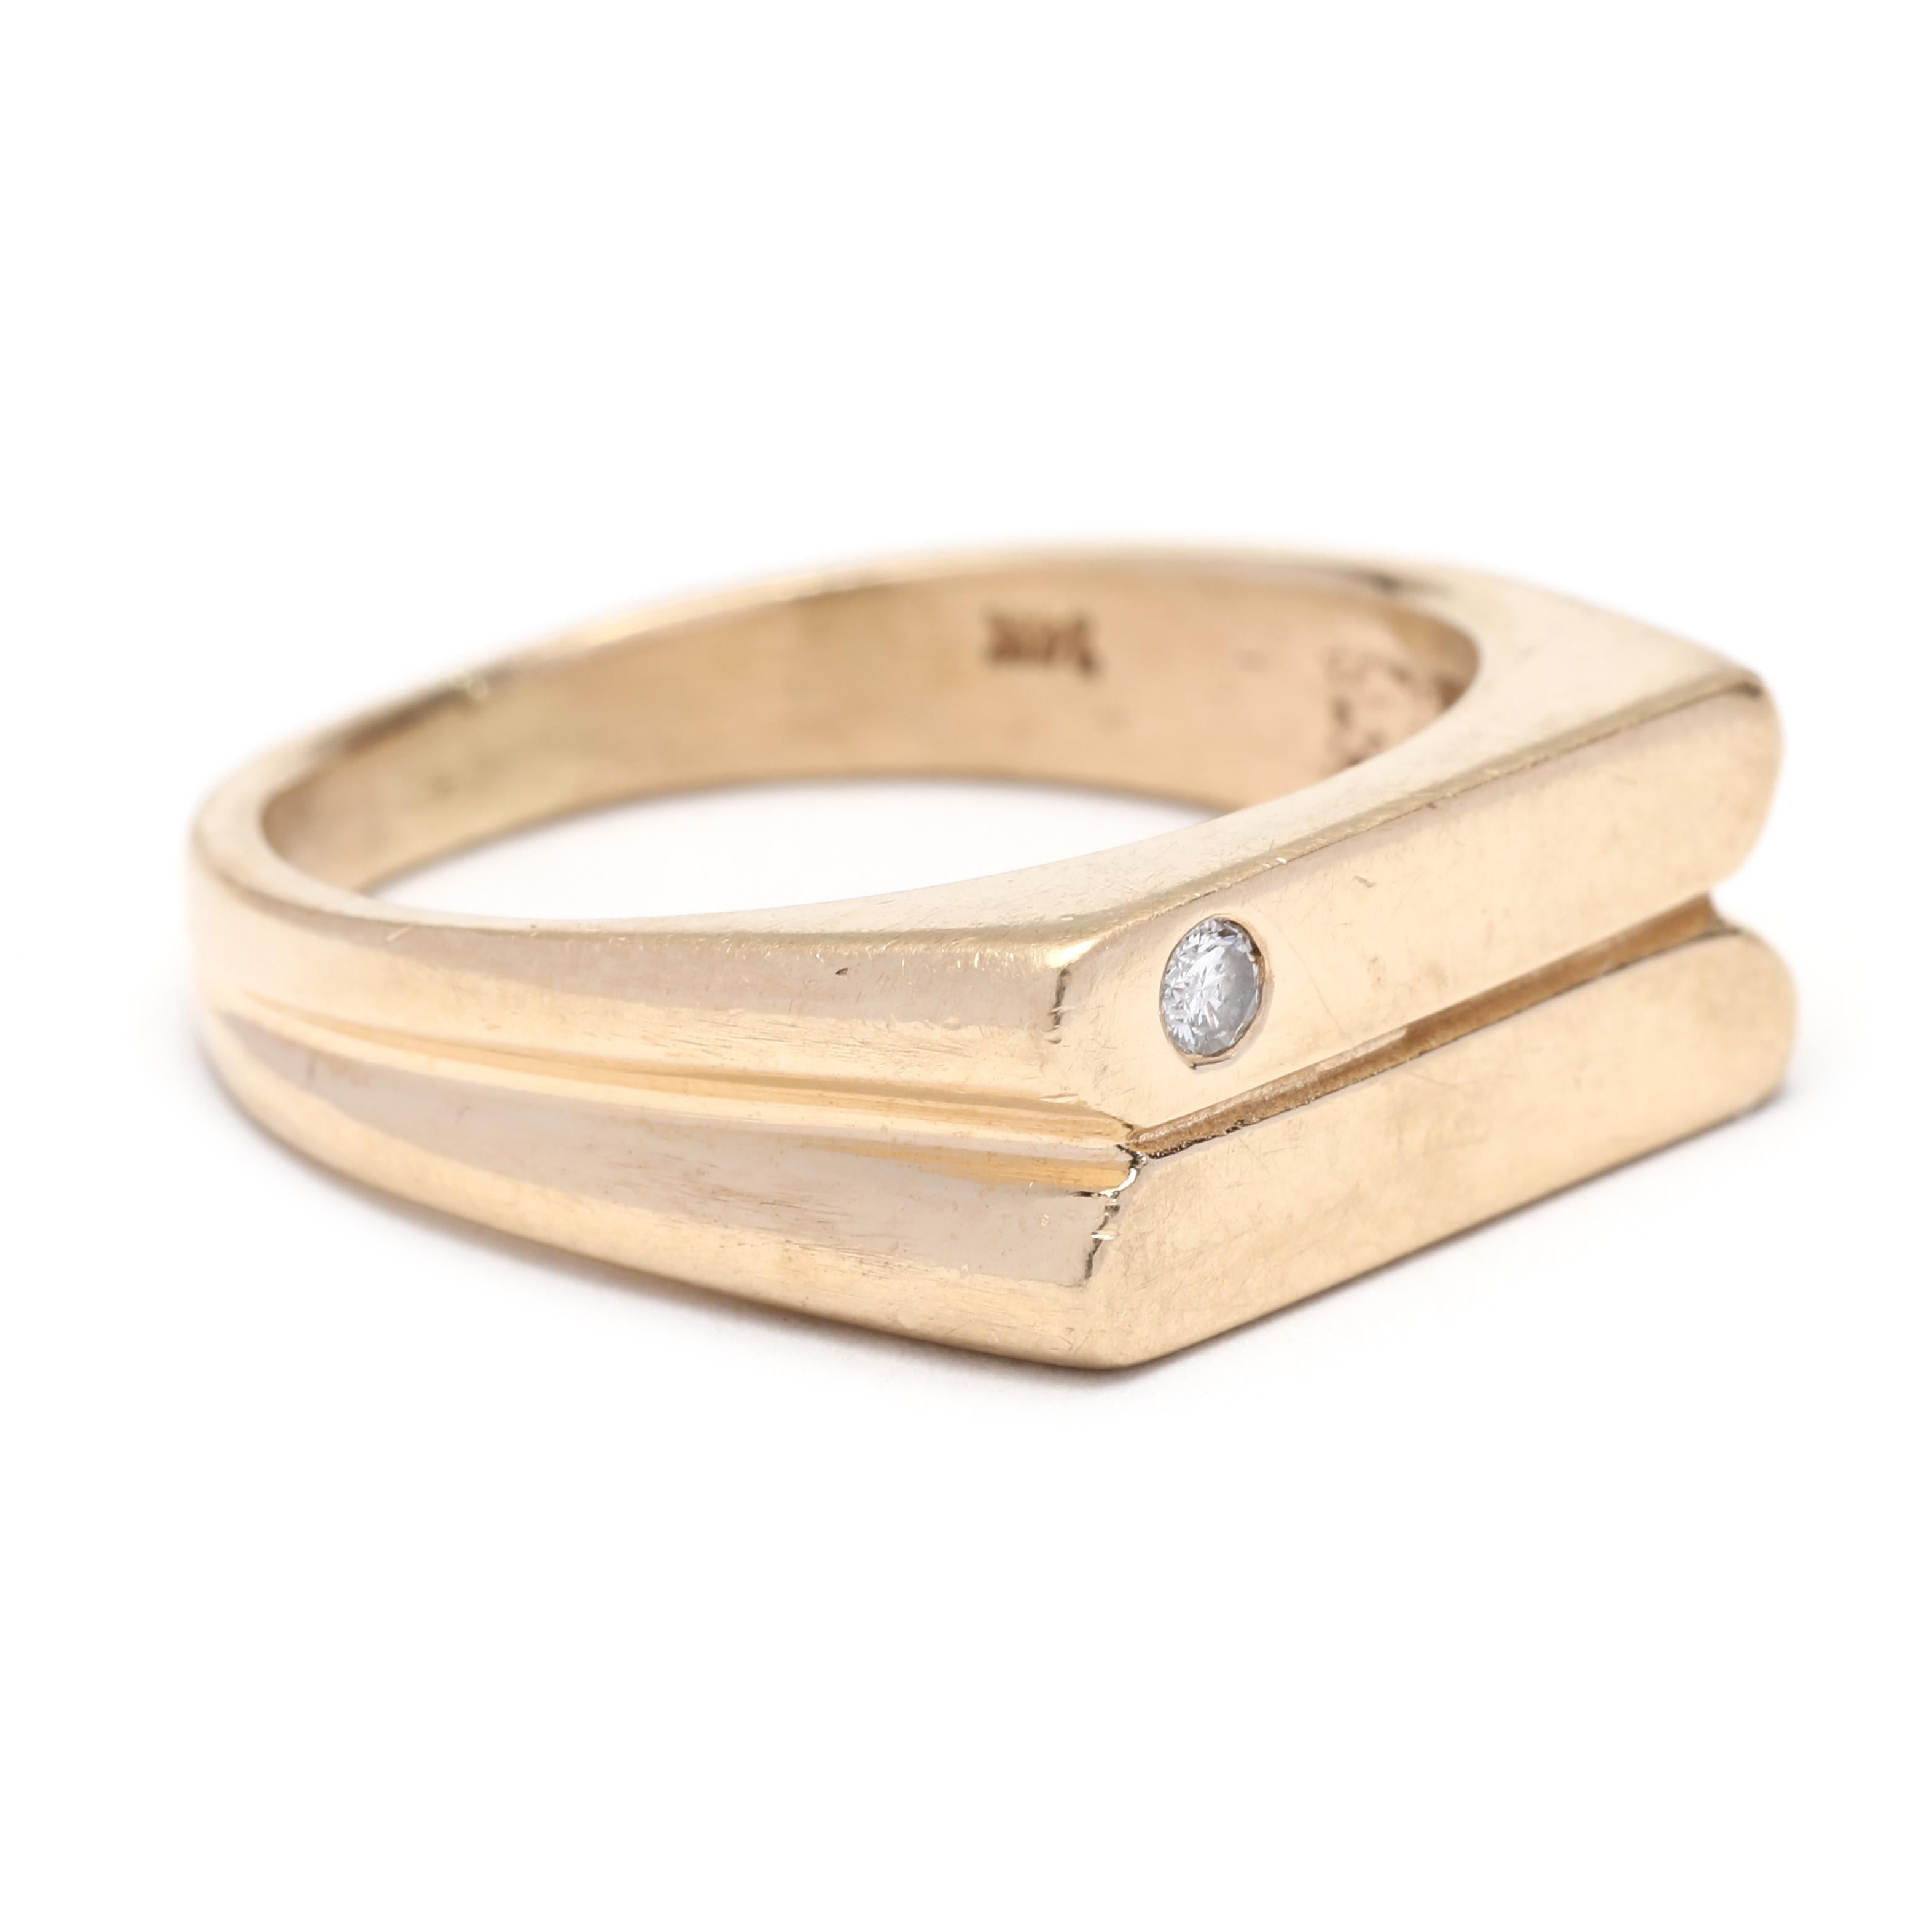 Add a touch of elegance to your look with this exquisite 14K yellow gold signet ring! An eye-catching 0.03ct diamond is set in a horizontal orientation at the center for added brilliance. The perfect modern twist on a timeless classic, this ring is